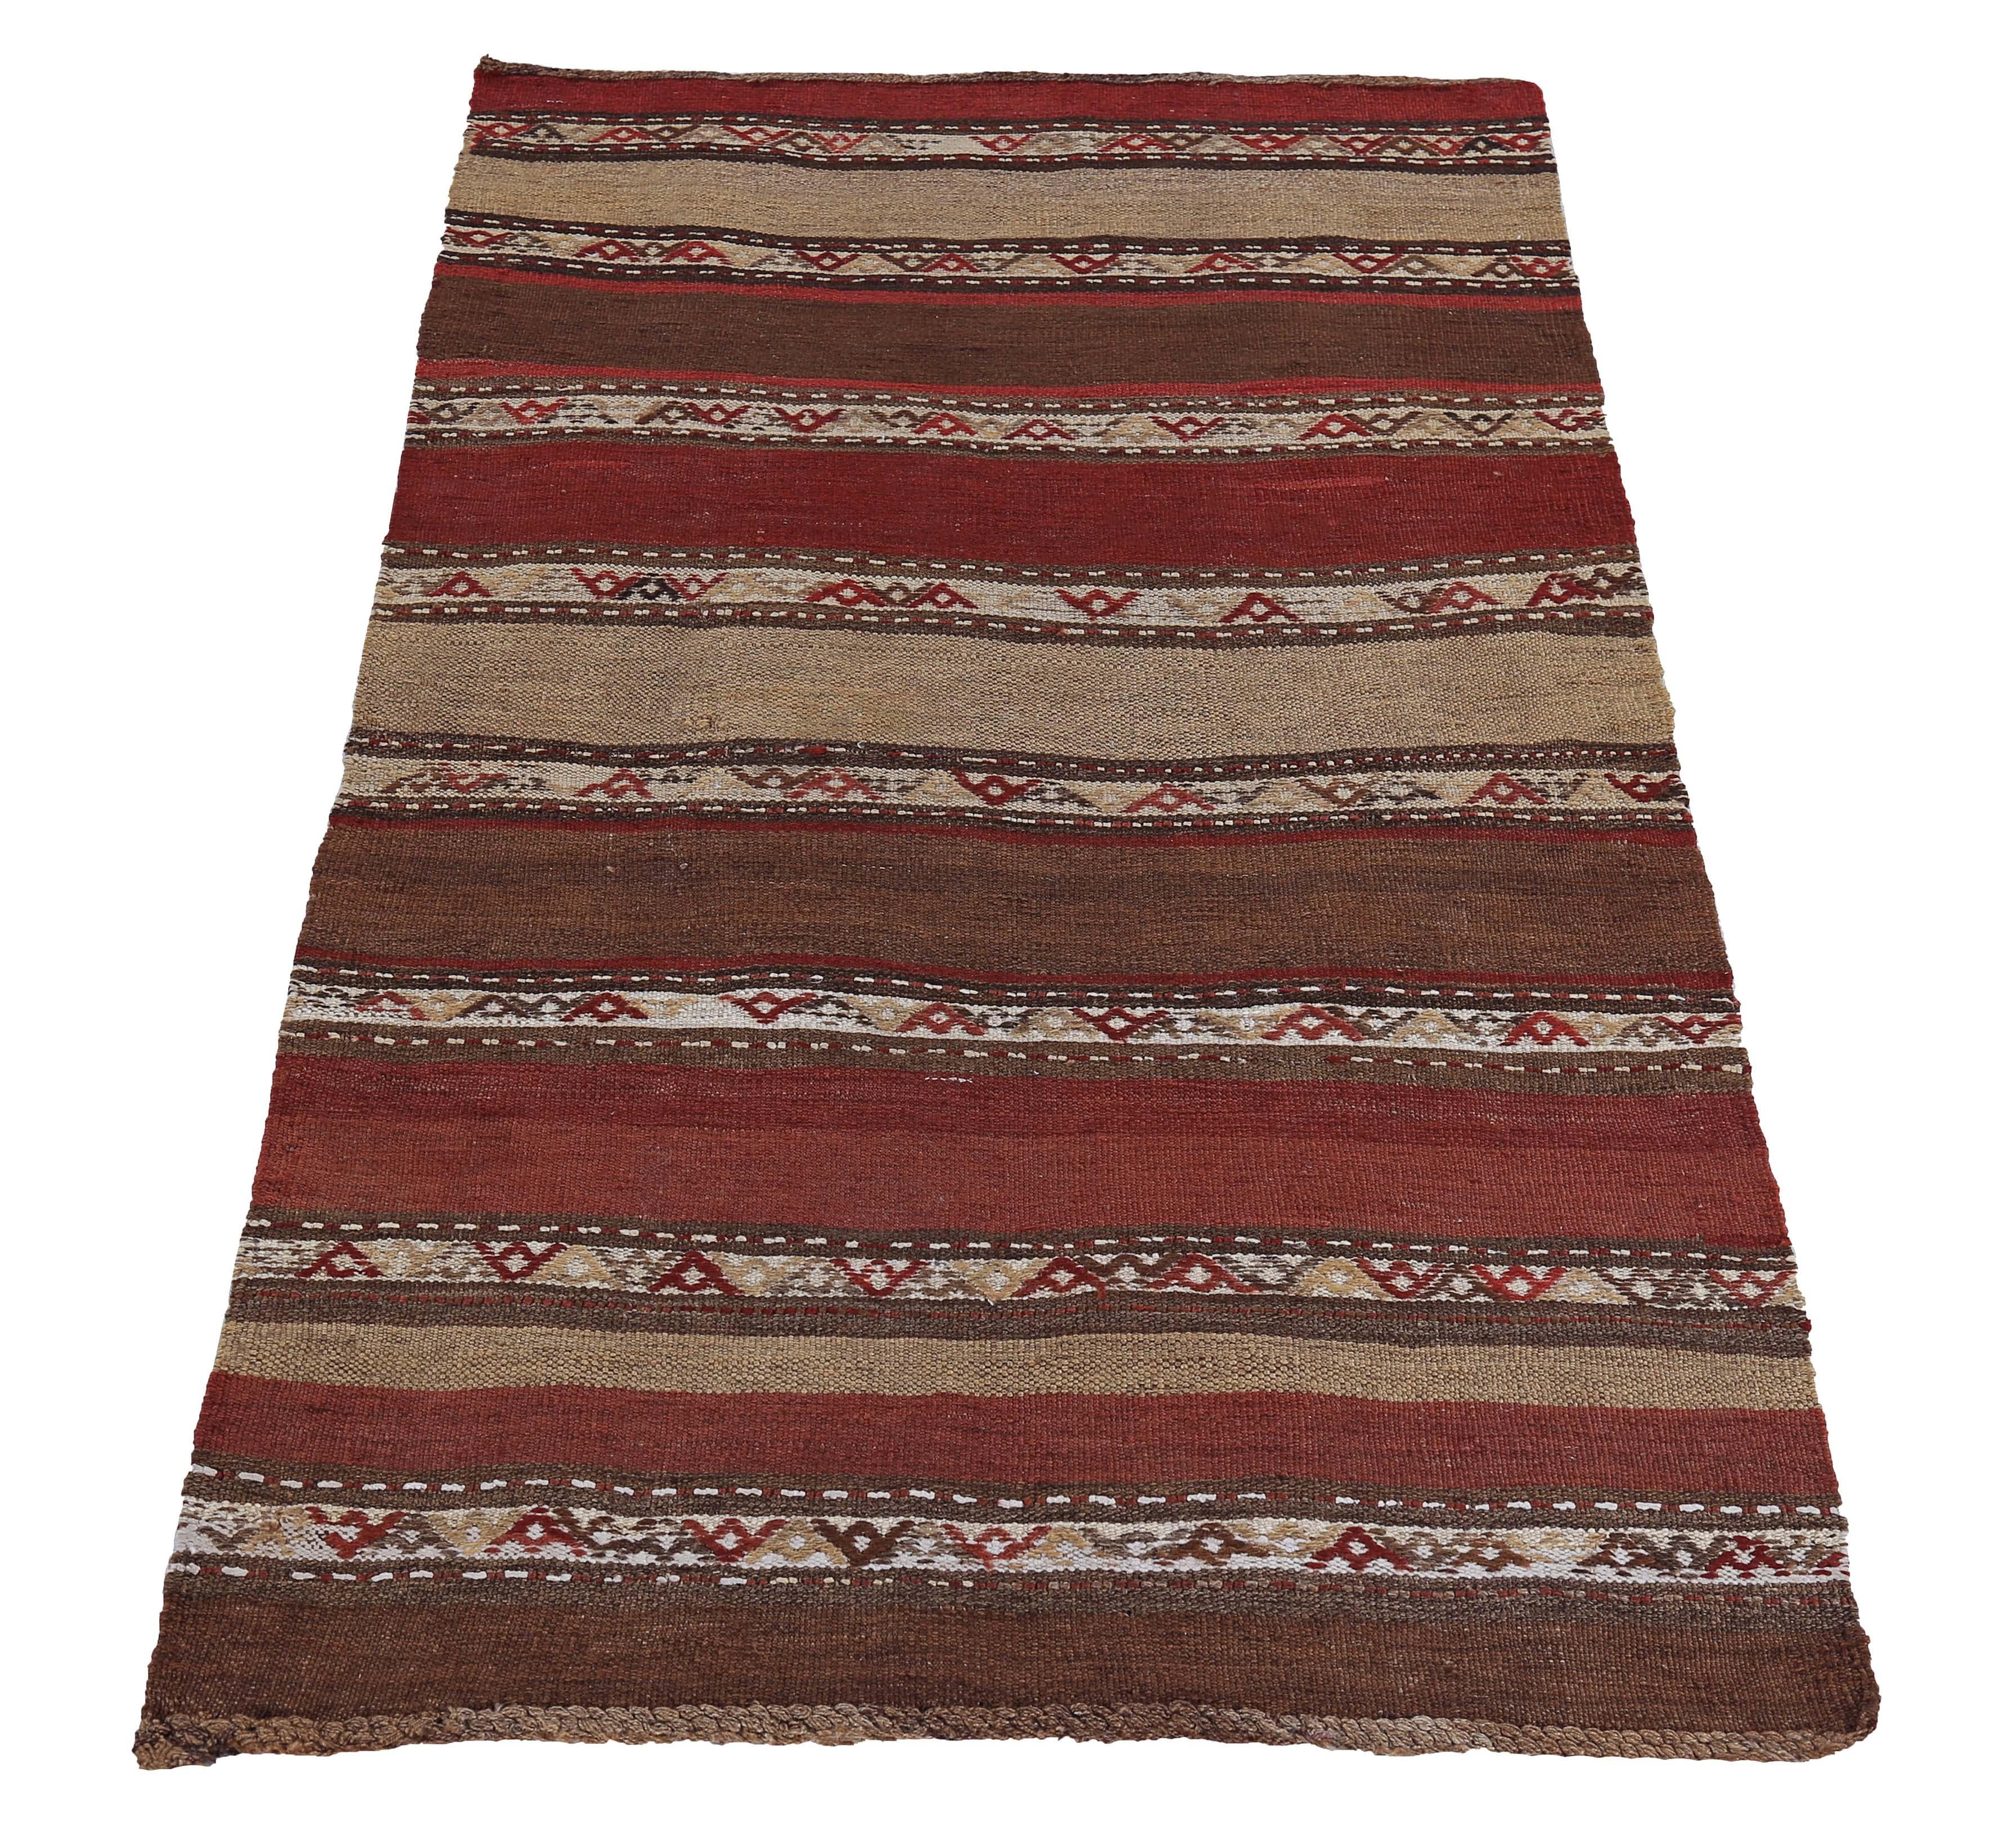 Turkish rug handwoven from the finest sheep’s wool and colored with all-natural vegetable dyes that are safe for humans and pets. It’s a traditional Kilim flat-weave design featuring beige and rust stripe tribal patterns on a brown field. It’s a